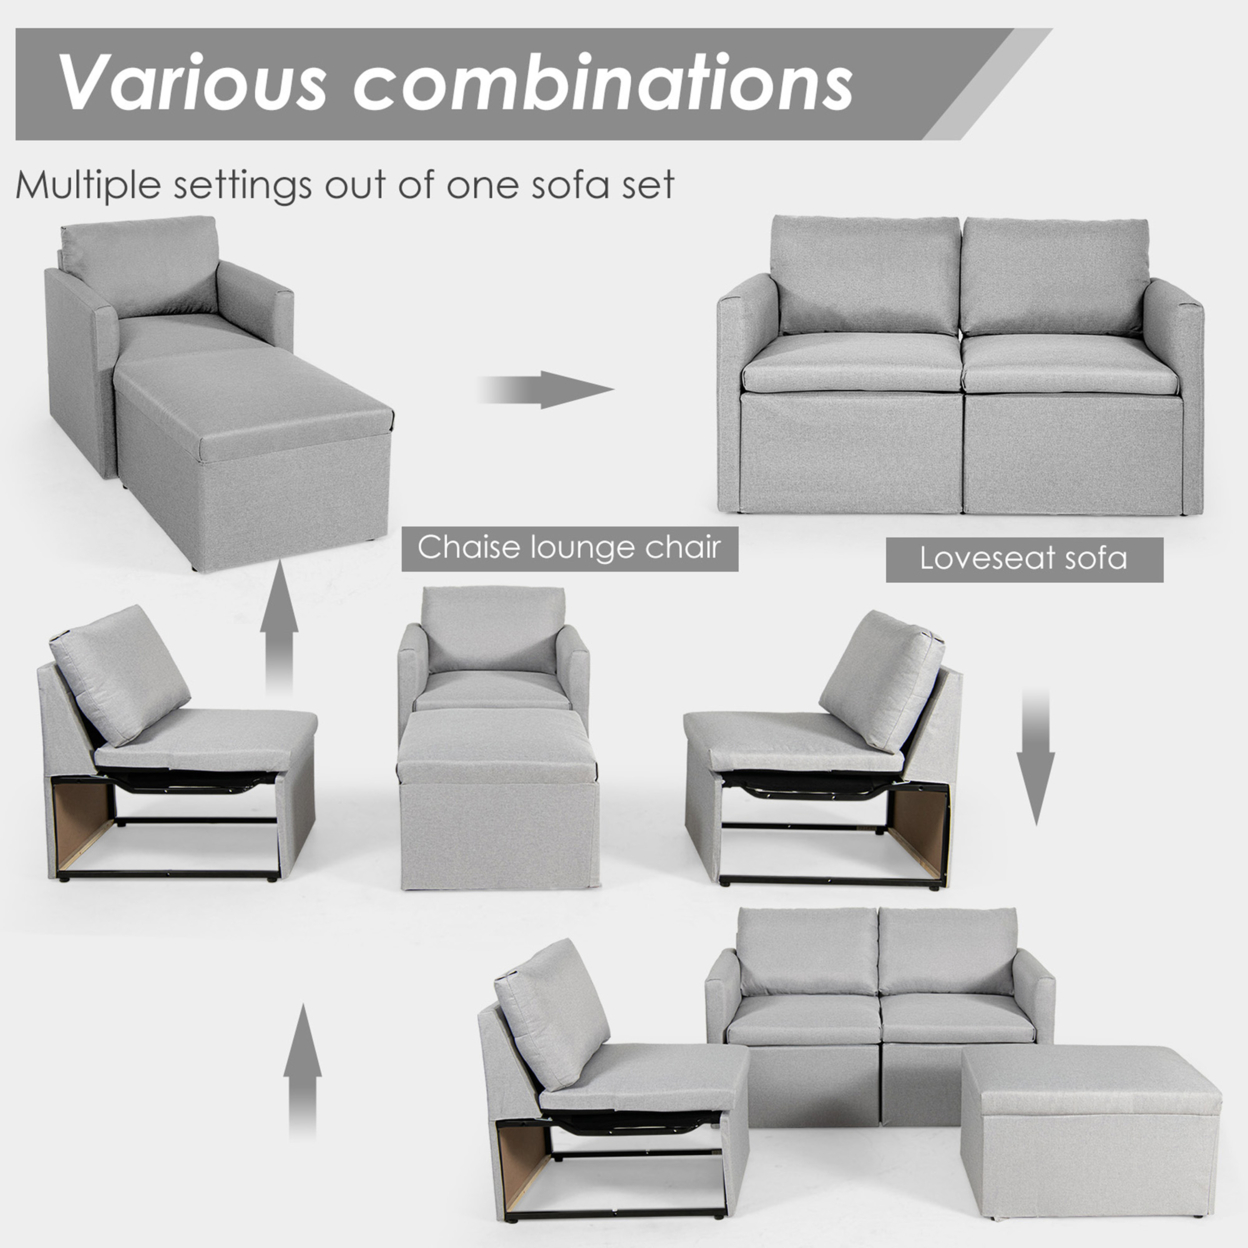 Convertible L-shaped Sectional Sofa Couch Chaise W/ Ottoman Cushions - Light Grey